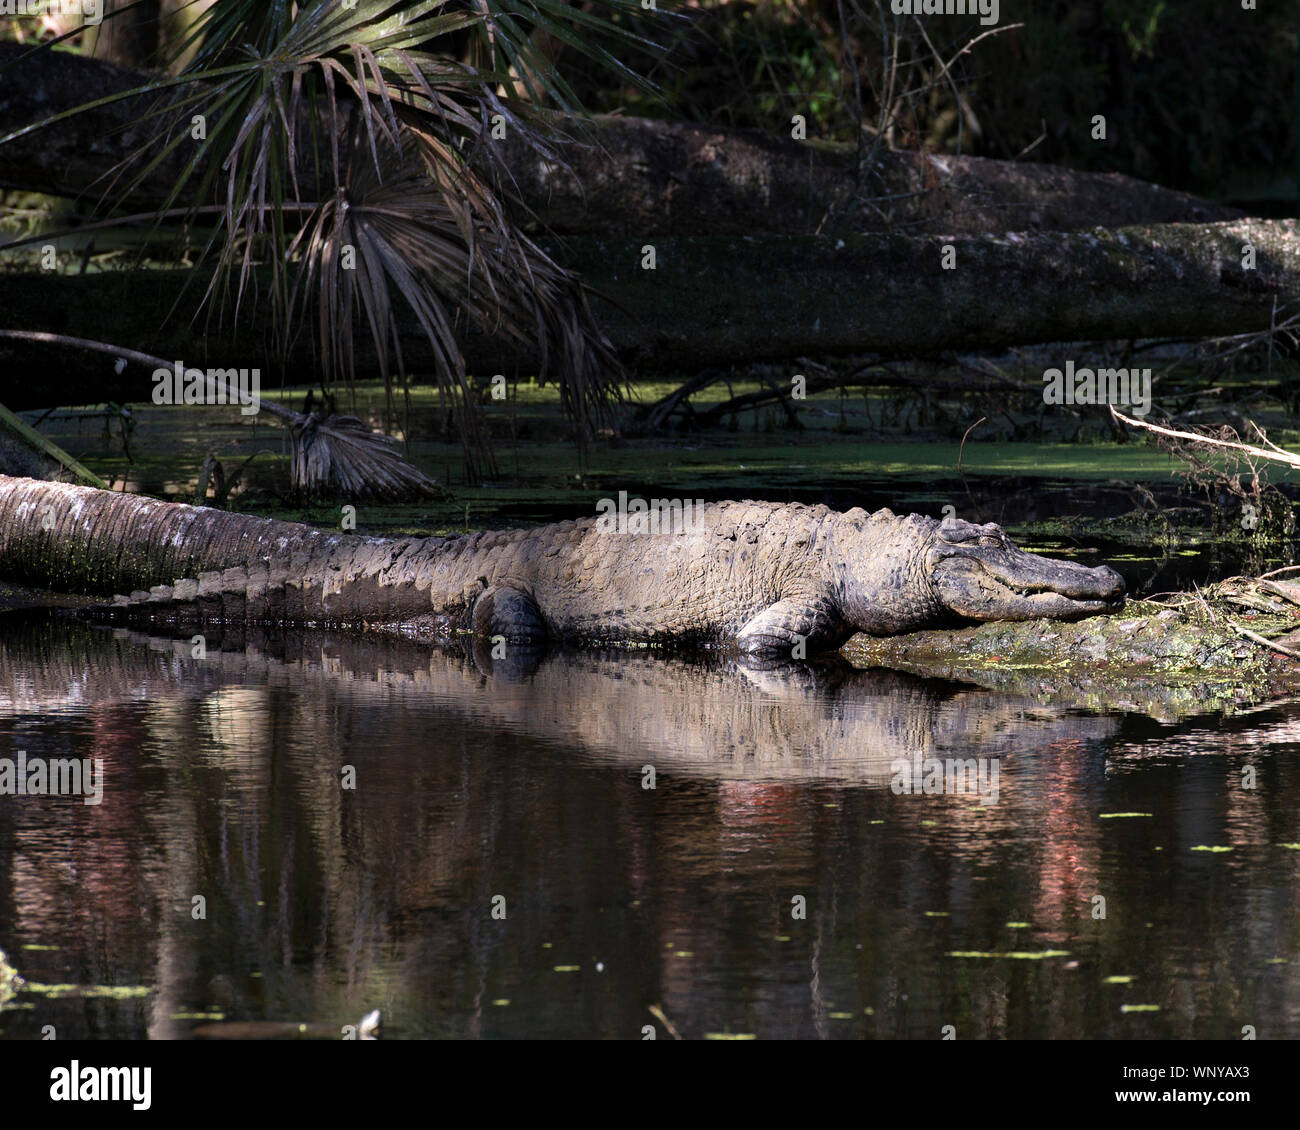 Alligator resting on a water log displaying head, body, eye, teeth, paws with a reflection in the water in its surrounding and environment. Stock Photo